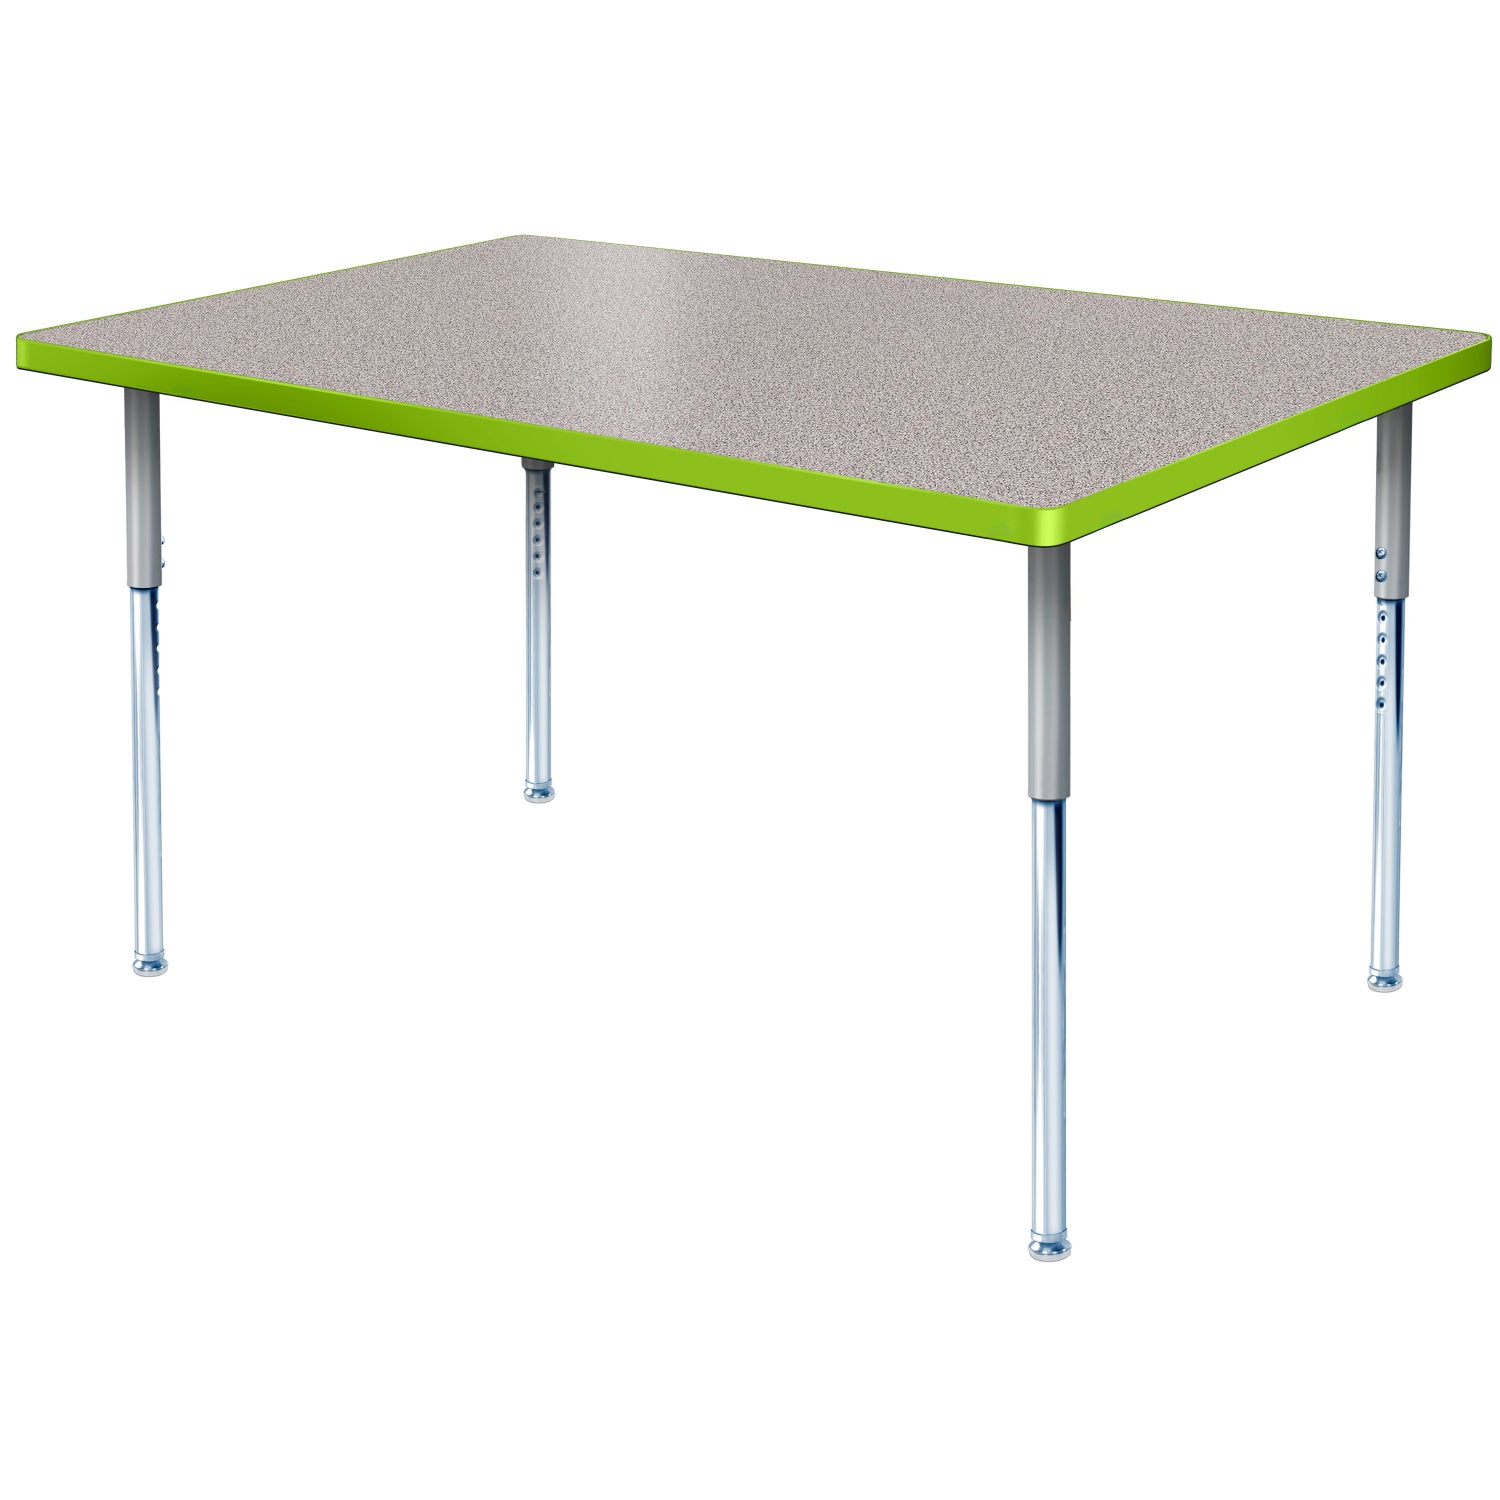 Modern Classic Series 30 x 72" Rectangular Activity Table with High Pressure Laminate Top, Adjustable Height Legs